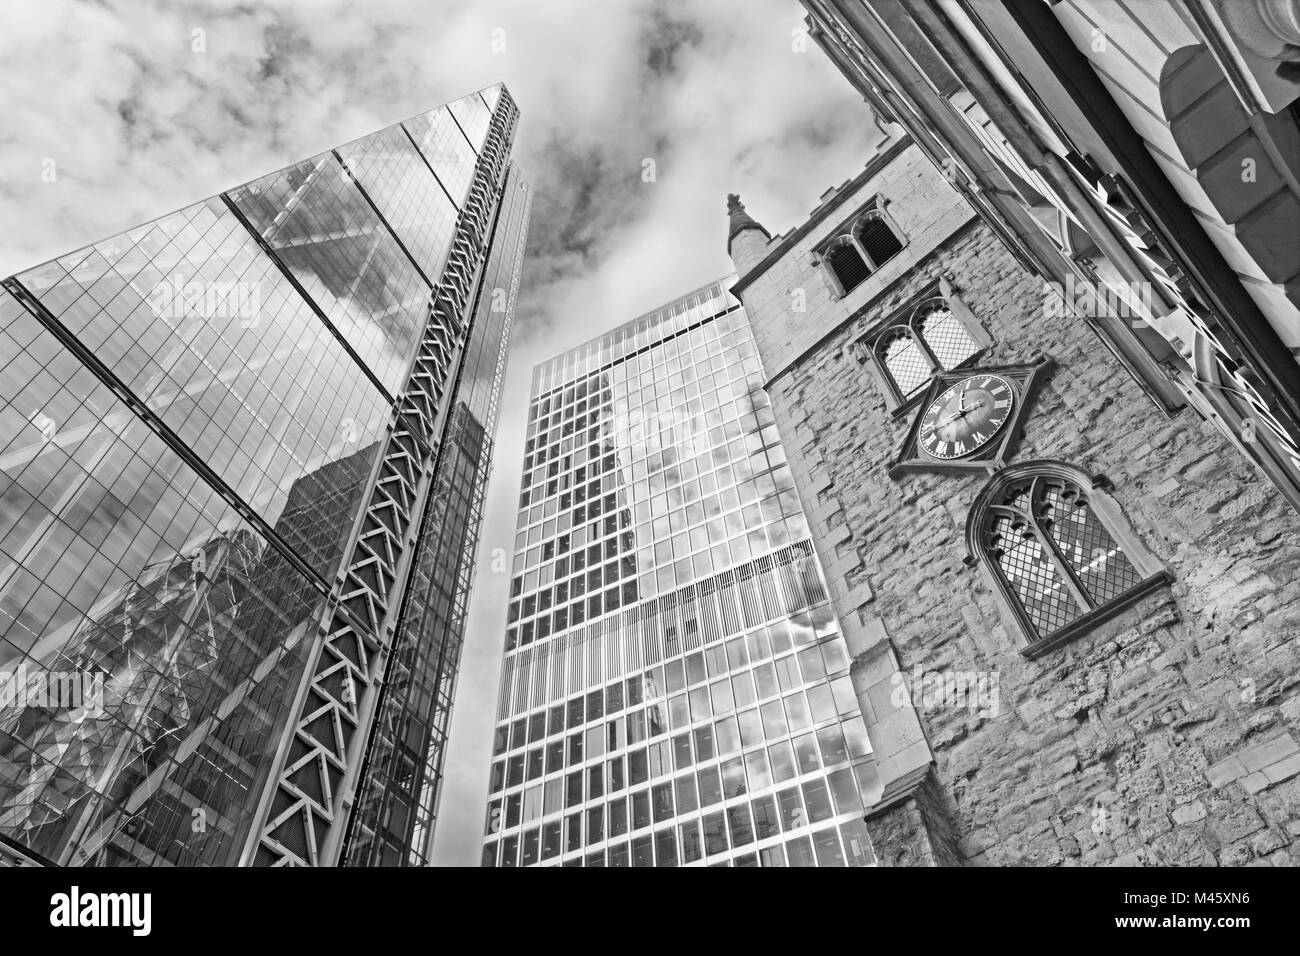 LONDON, GREAT BRITAIN - SEPTEMBER 14, 2017: The Leadenhall Building and Aviva building and tower of church St. Andrew Undershaft. Stock Photo